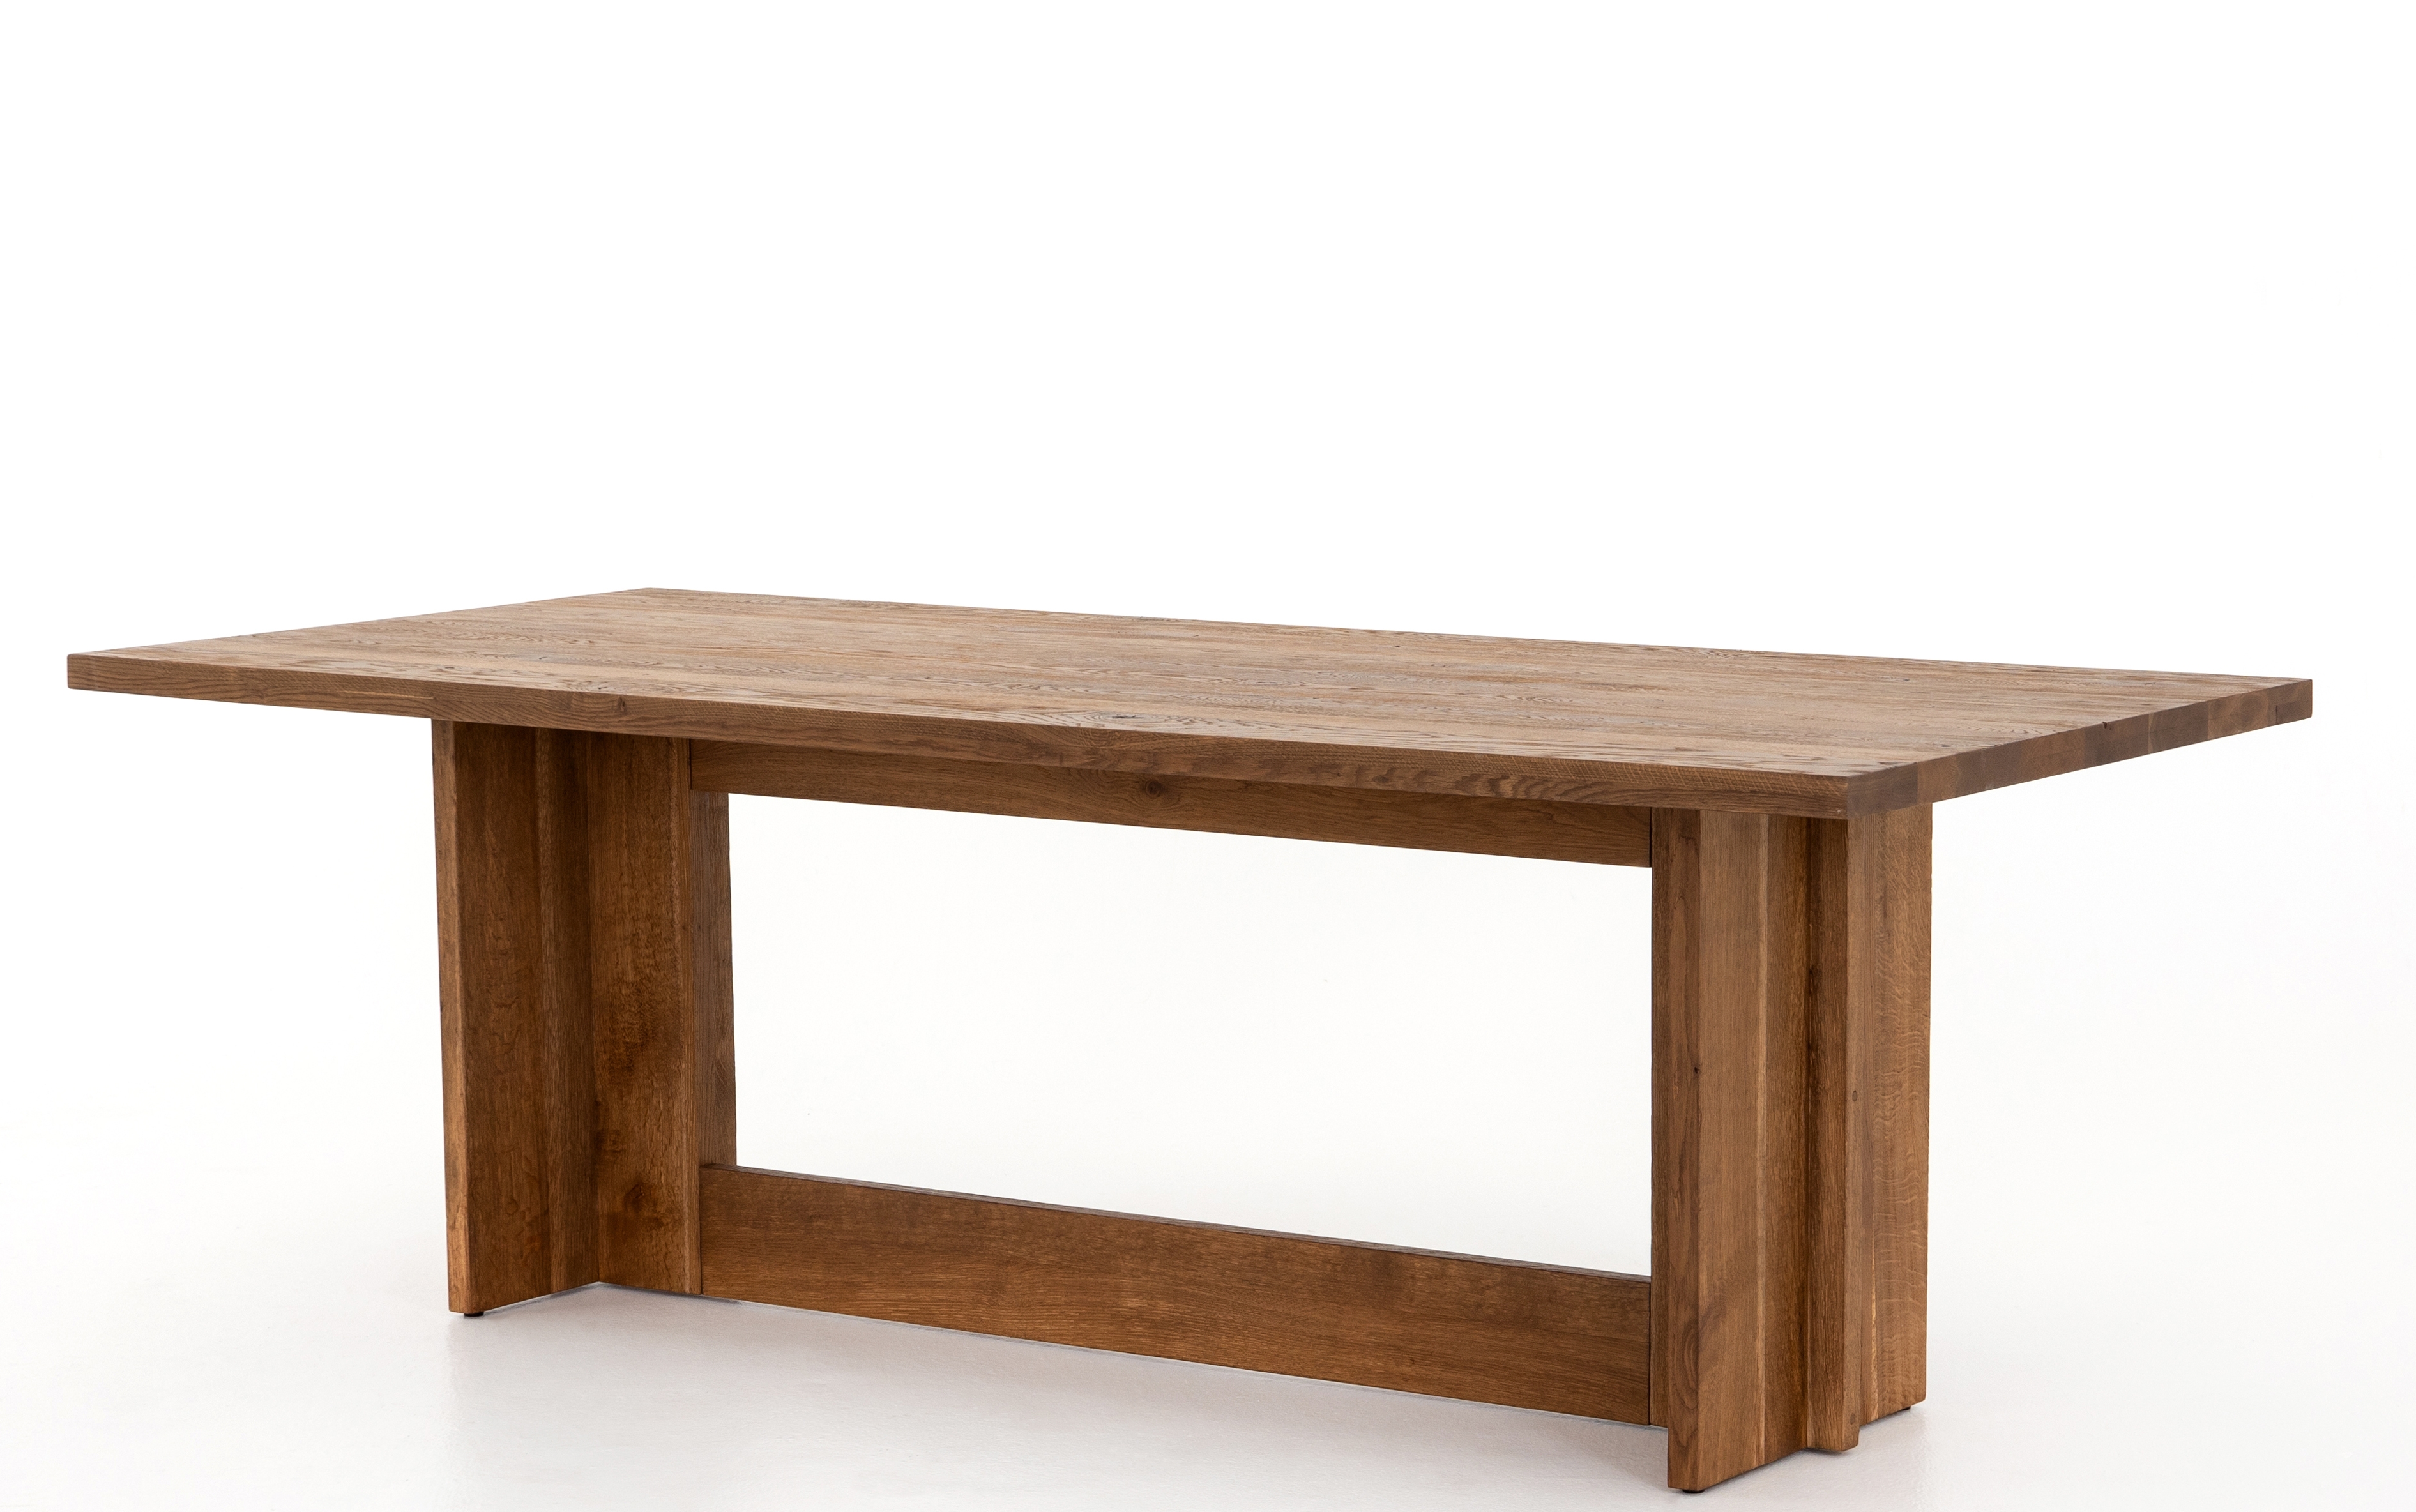 Elexis Dining Table - Image 1